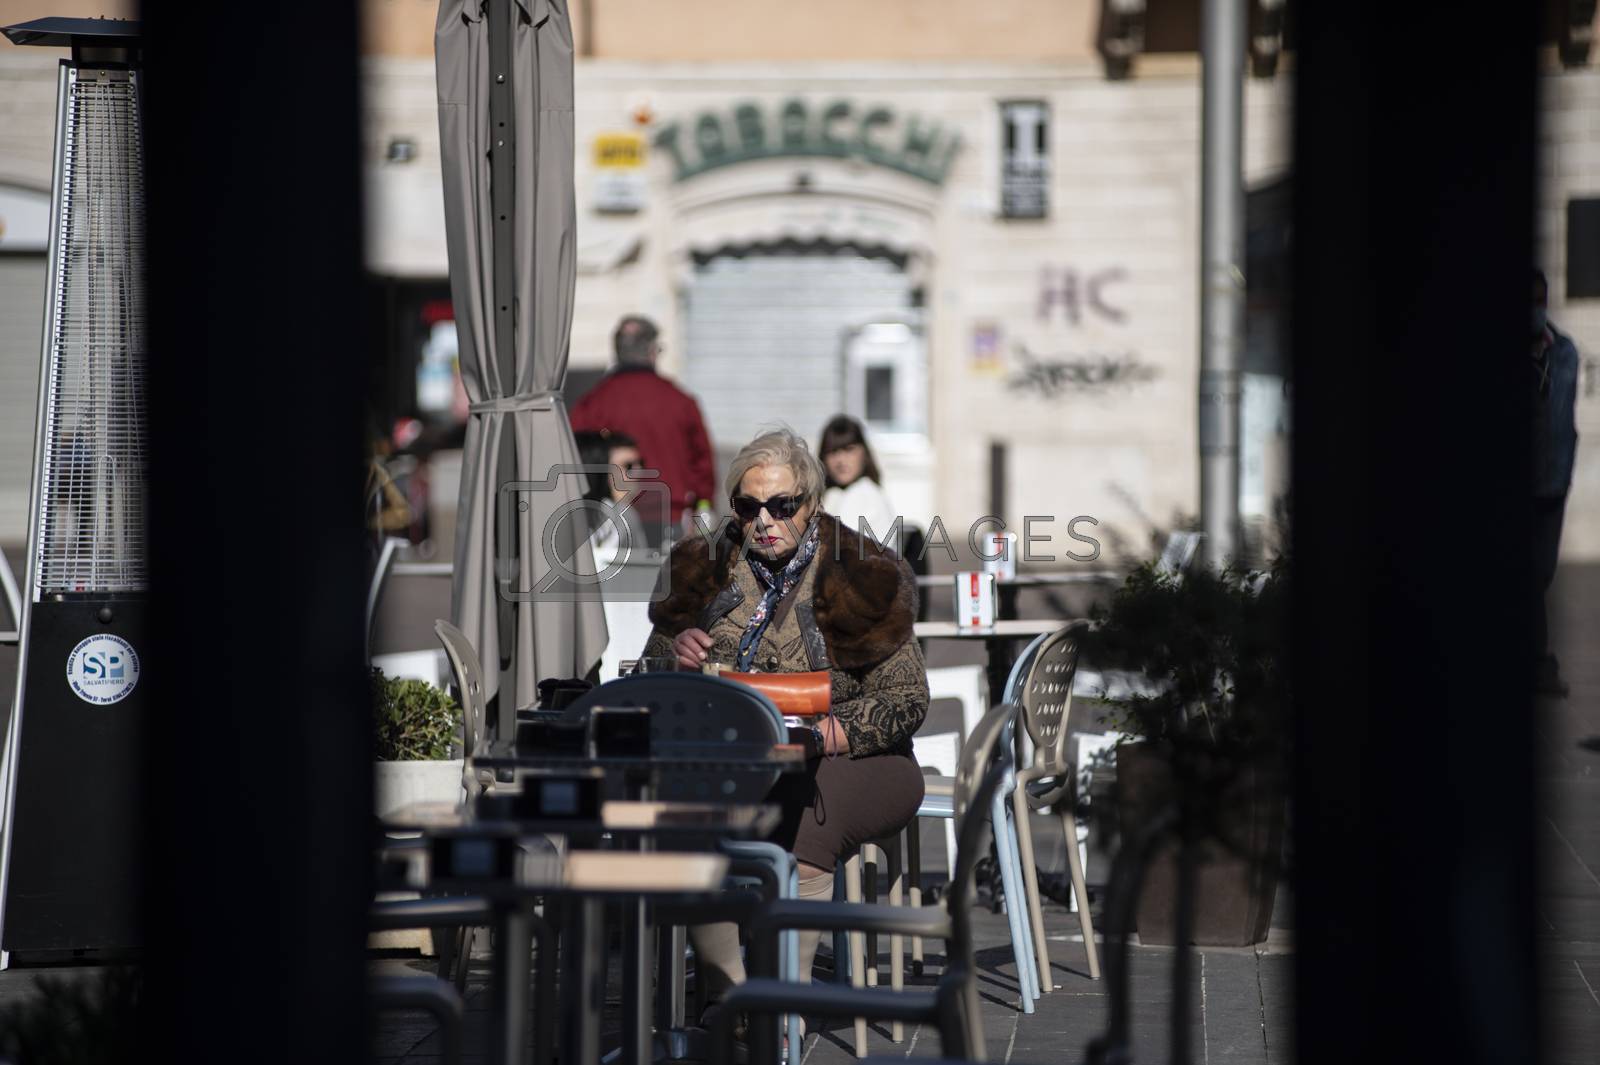 Royalty free image of woman sitting at a table in an outdoor cafe by carfedeph